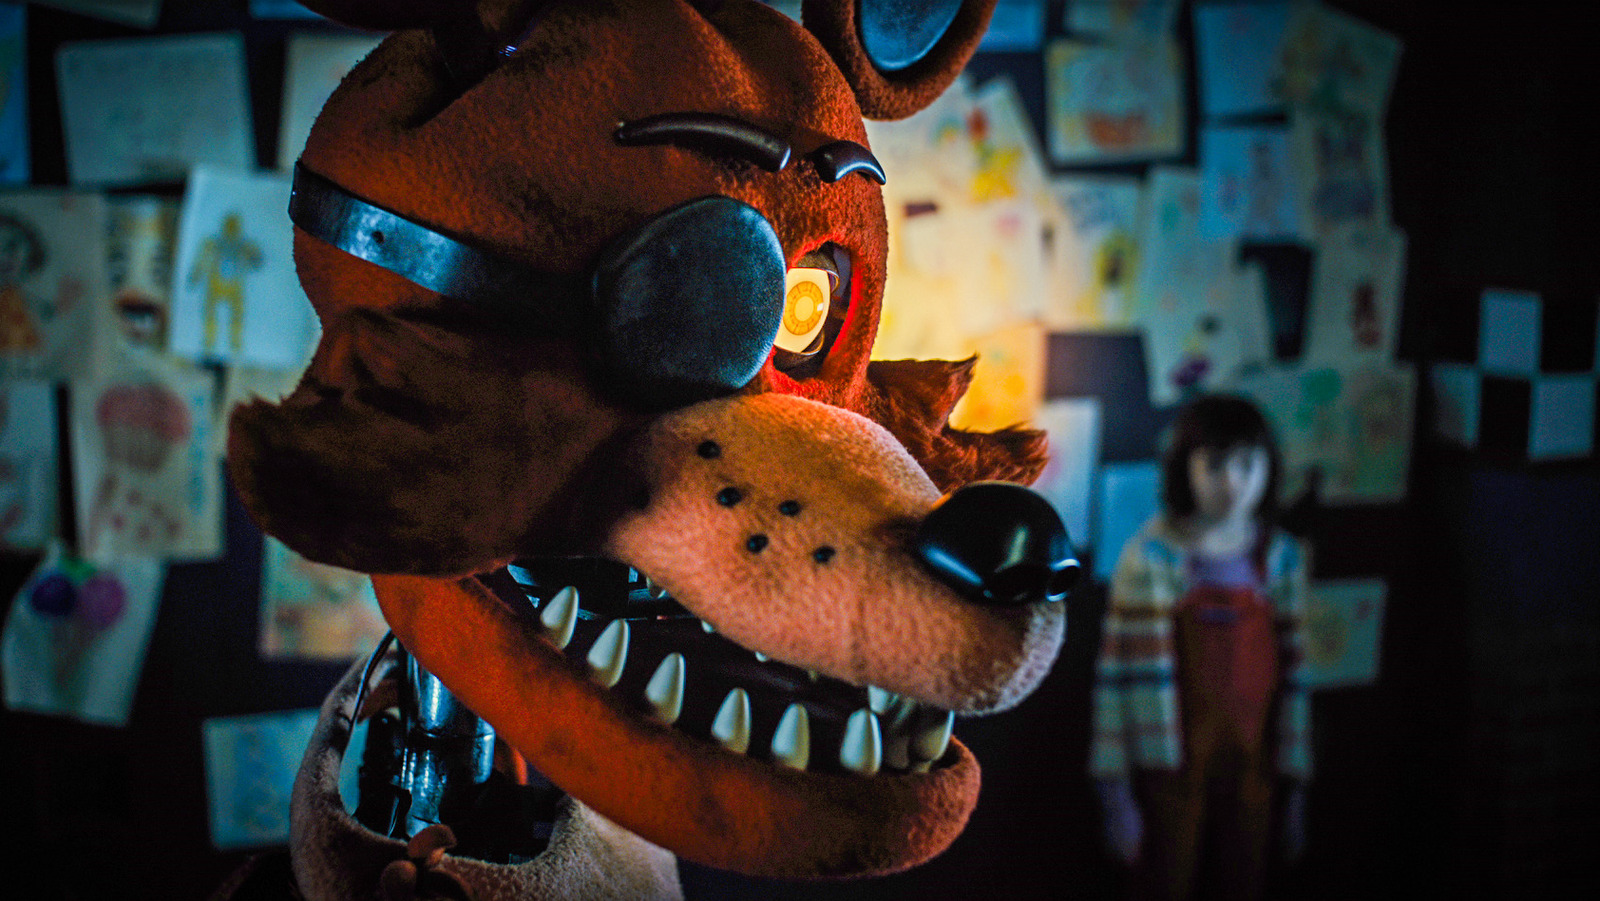 The FNAF Movie is premiering 3 days ahead of the USA in New